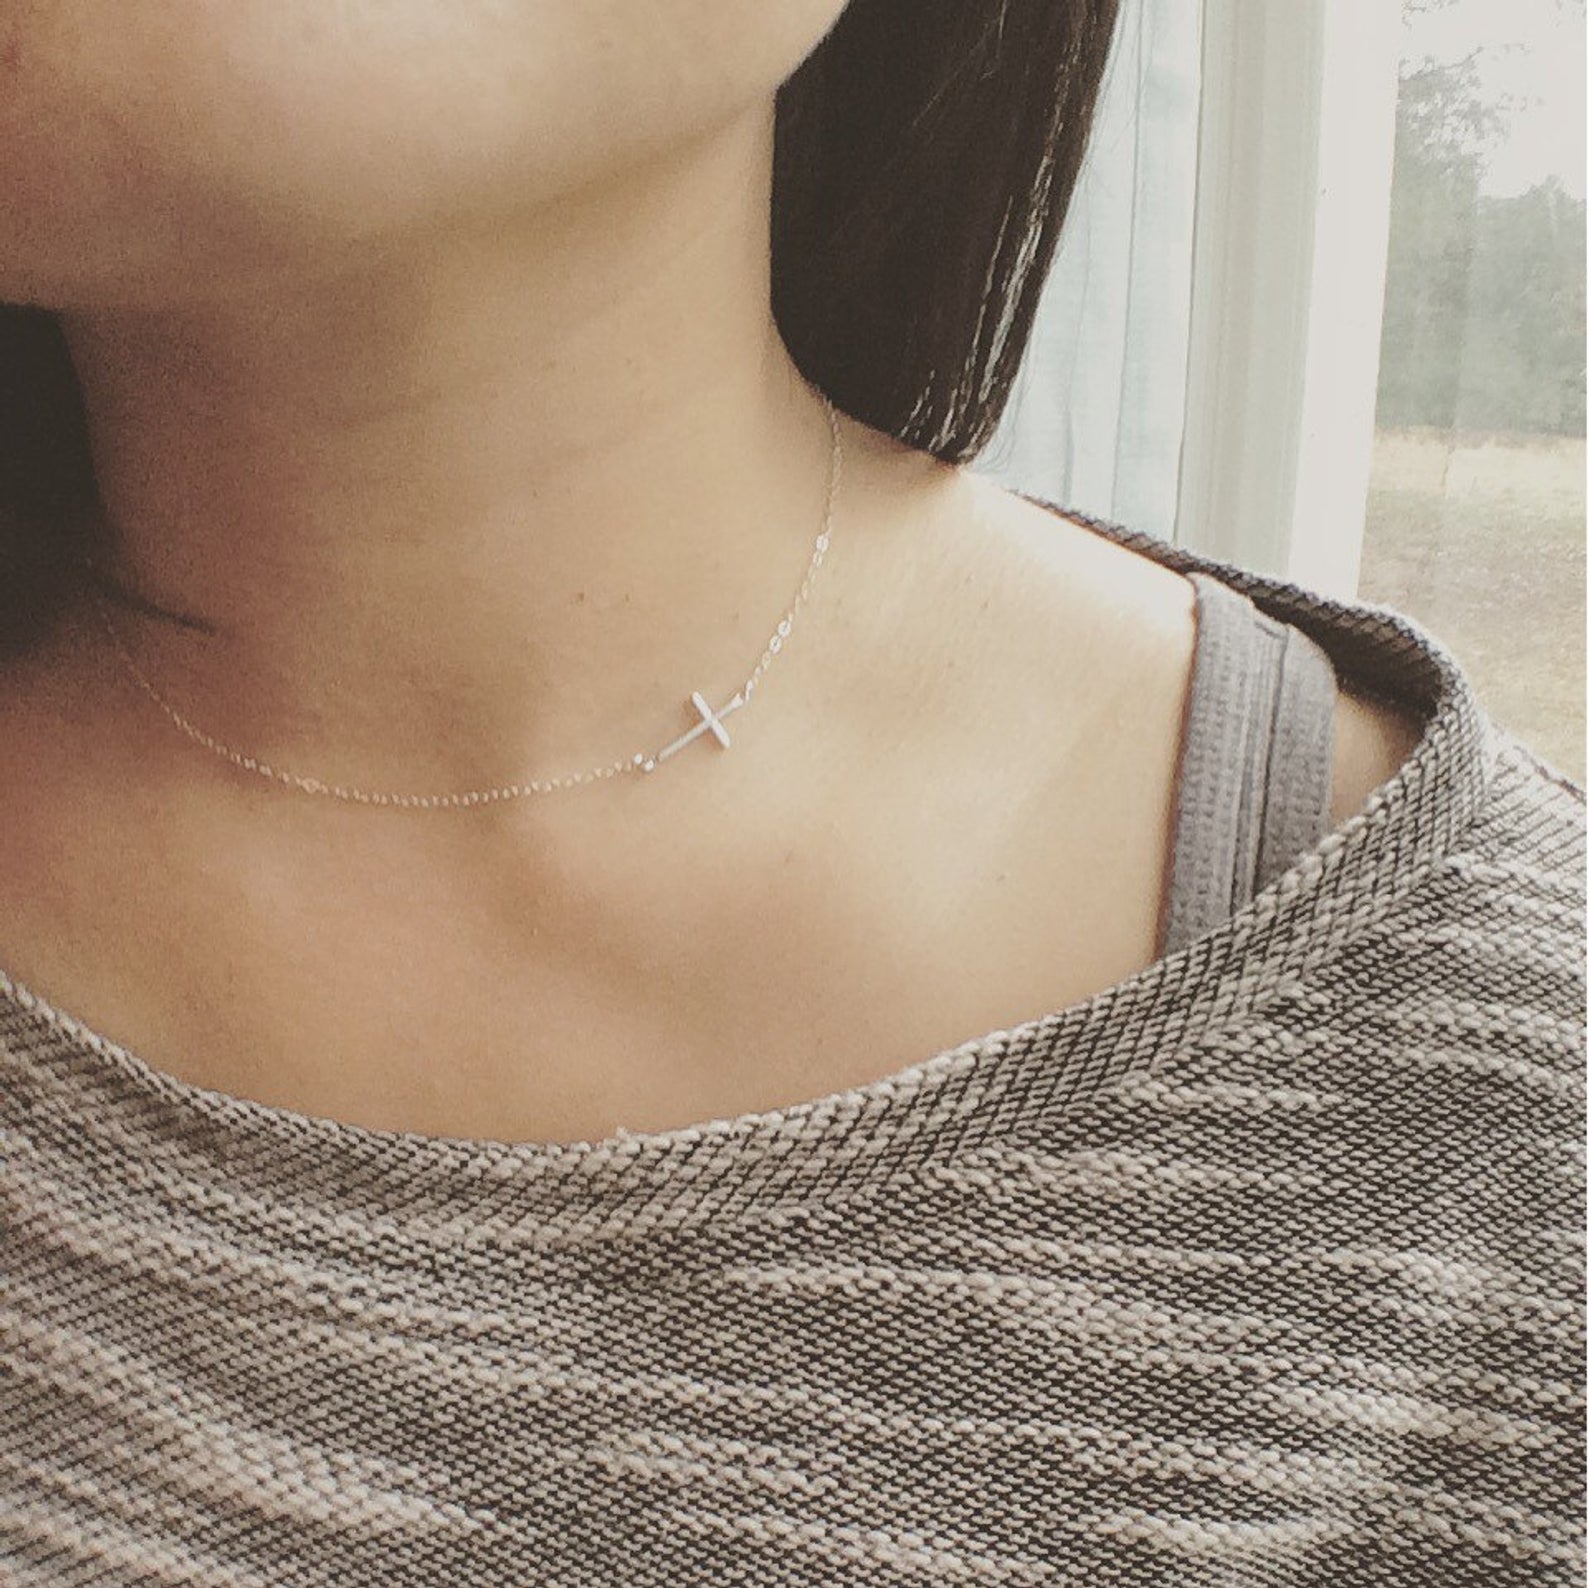 Easter Gift, Cross Necklace, Sideways Cross Necklace, All Sterling Silver, Everyday Wear, Holiday Gift, Cross Choker, Mothers Gift, Wife Gift, Mother and Children, Best Friends Jewelry, Friendship necklaces,  Valentines Gift, Custom Jewelry, Inspiration Cuff,  Wedding Party Gifts, Bridesmaid Jewelry, Bridal shower gift ideas,  Bridesmaid Jewelry &amp; Gifts, Bridal Party, Graduation Gift.